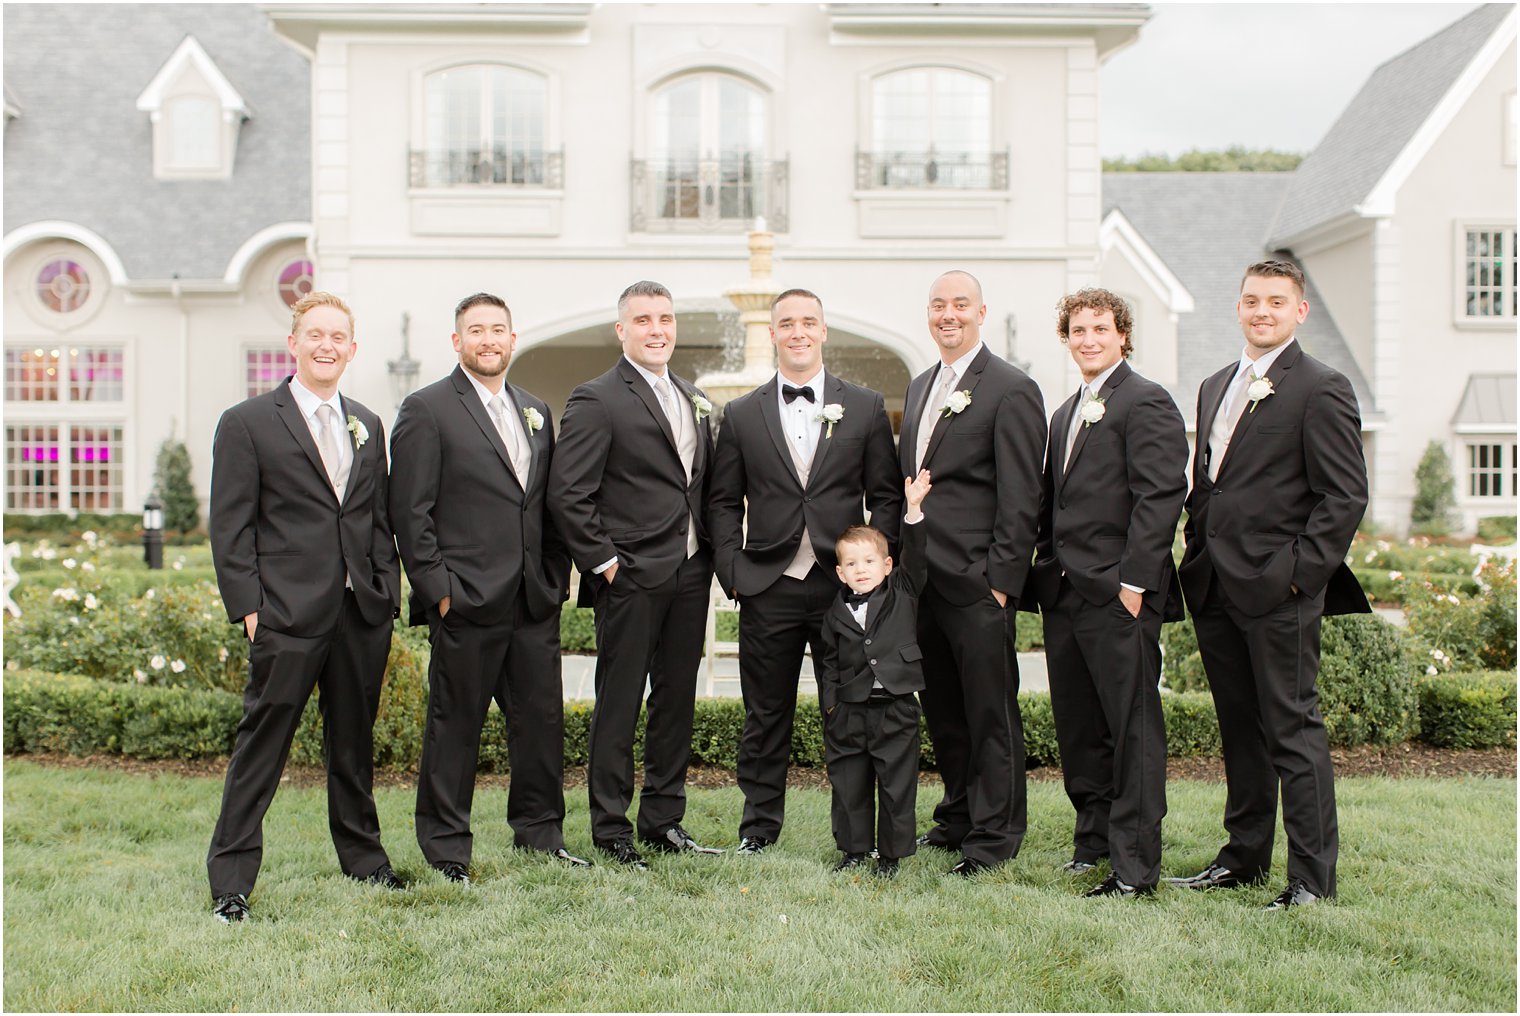 Photo of groom, groomsmen, and ring bearer at Park Chateau Estate